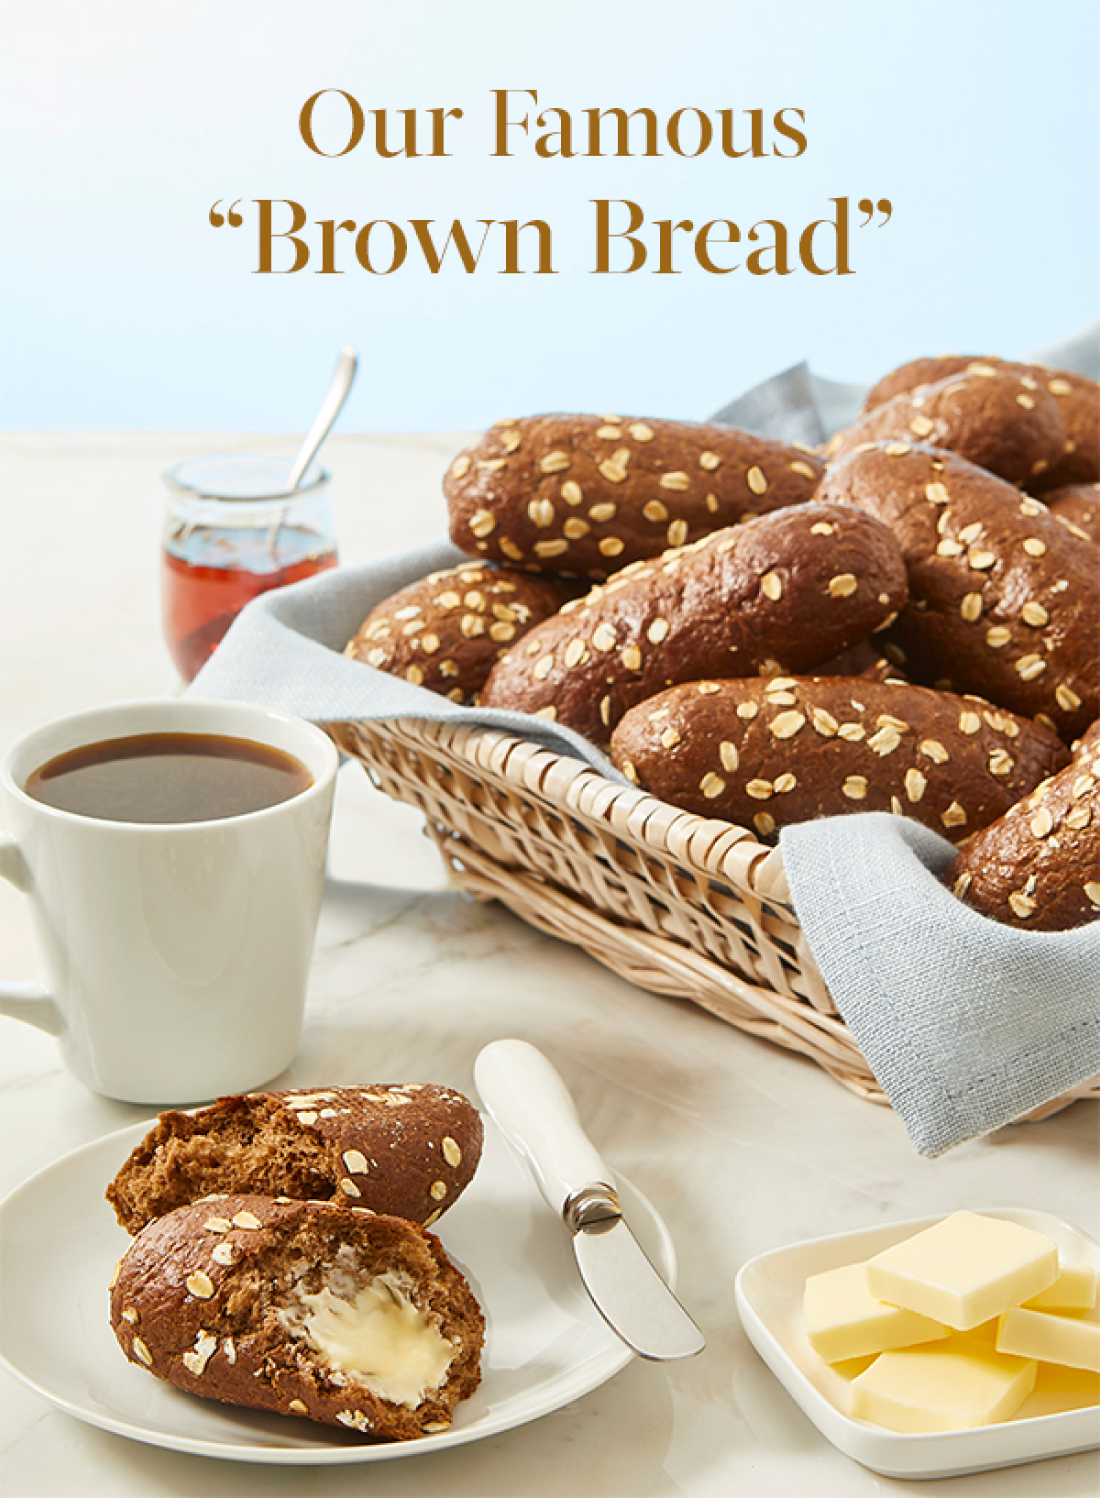 Out Famous "Brown Bread"